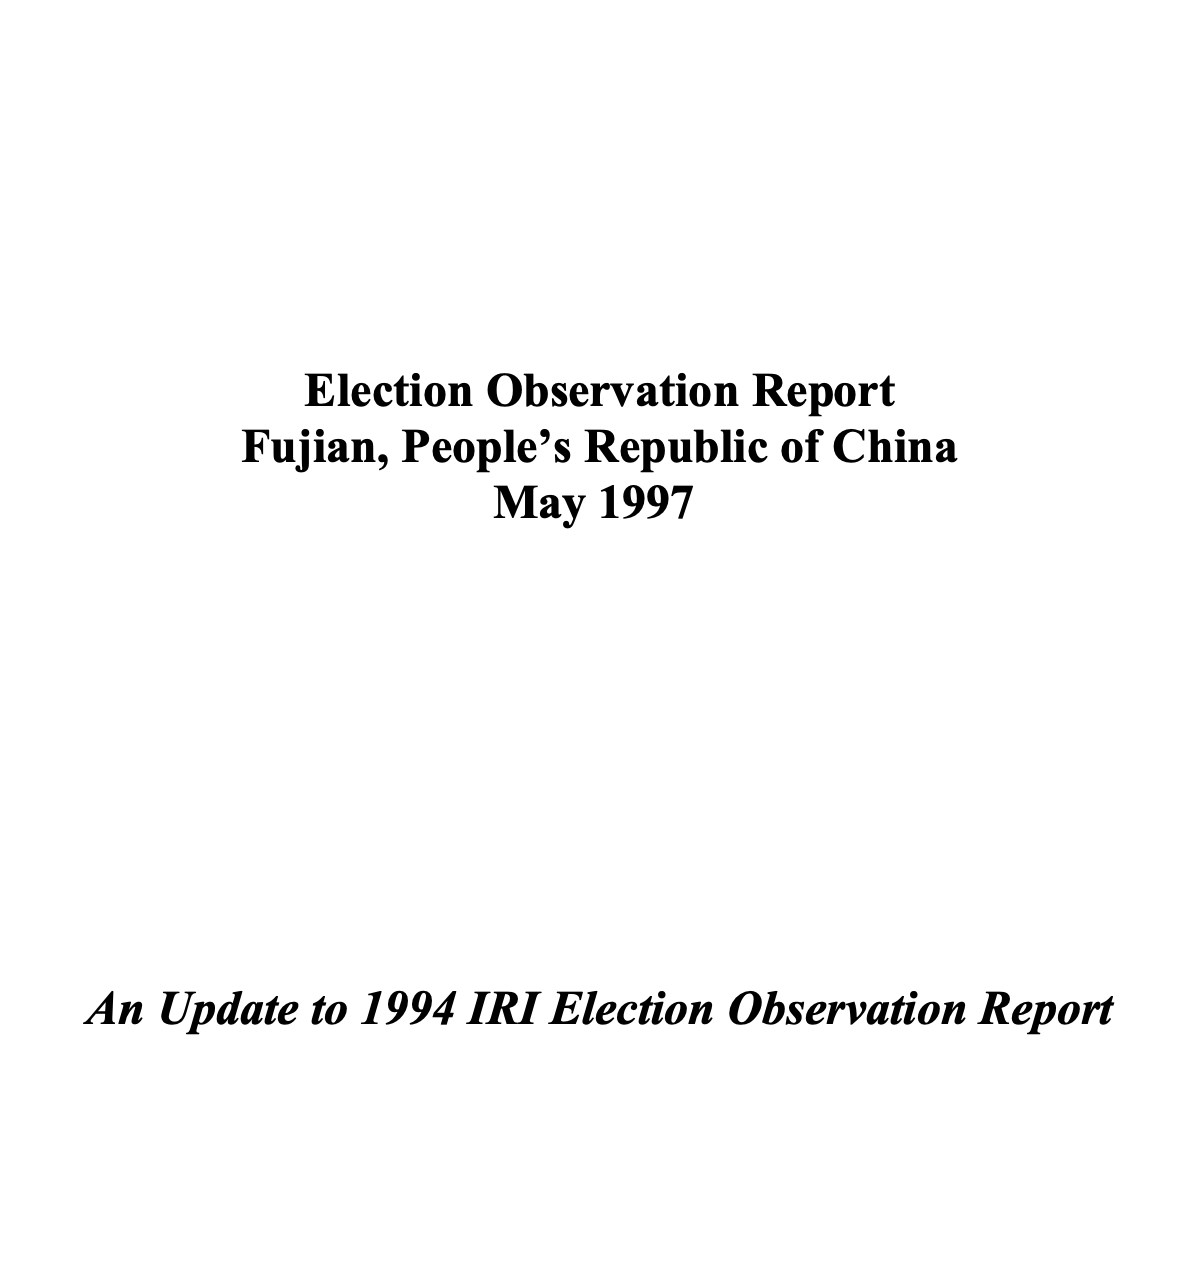 Election Observation Report Fujian, People’s Republic of China May 1997 An Update to 1994 IRI Election Observation Report